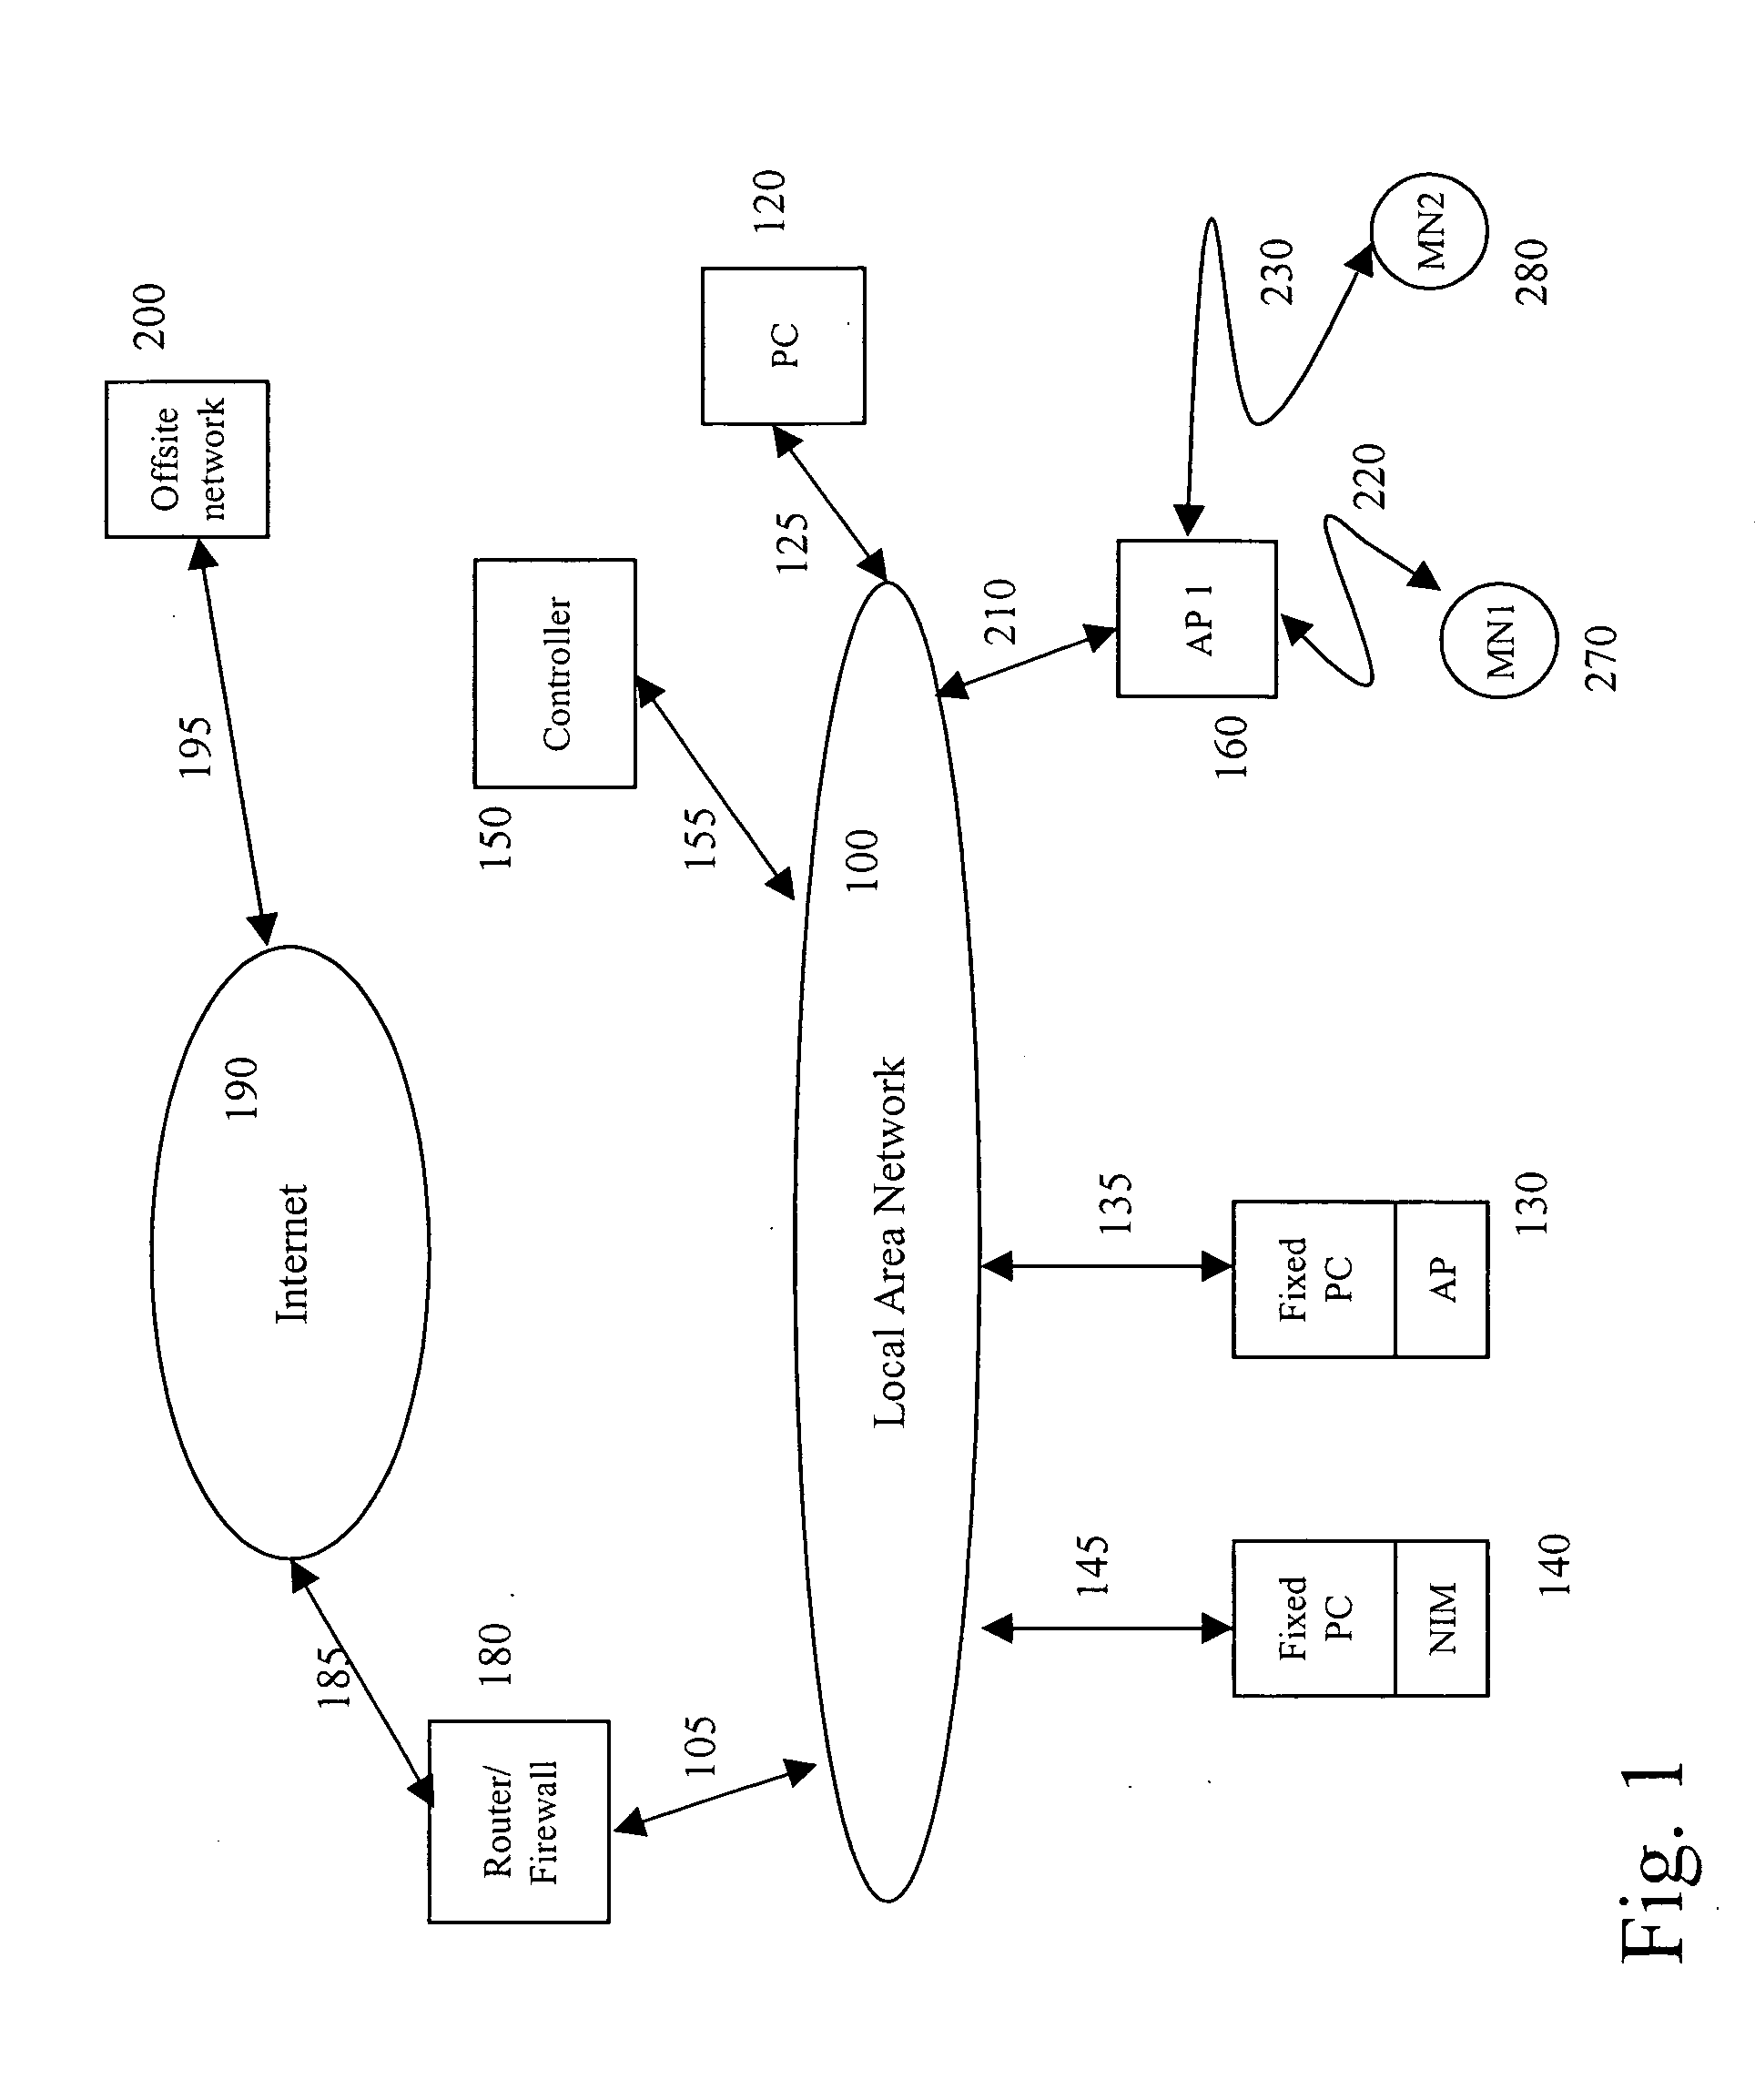 Wireless network having real-time channel allocation